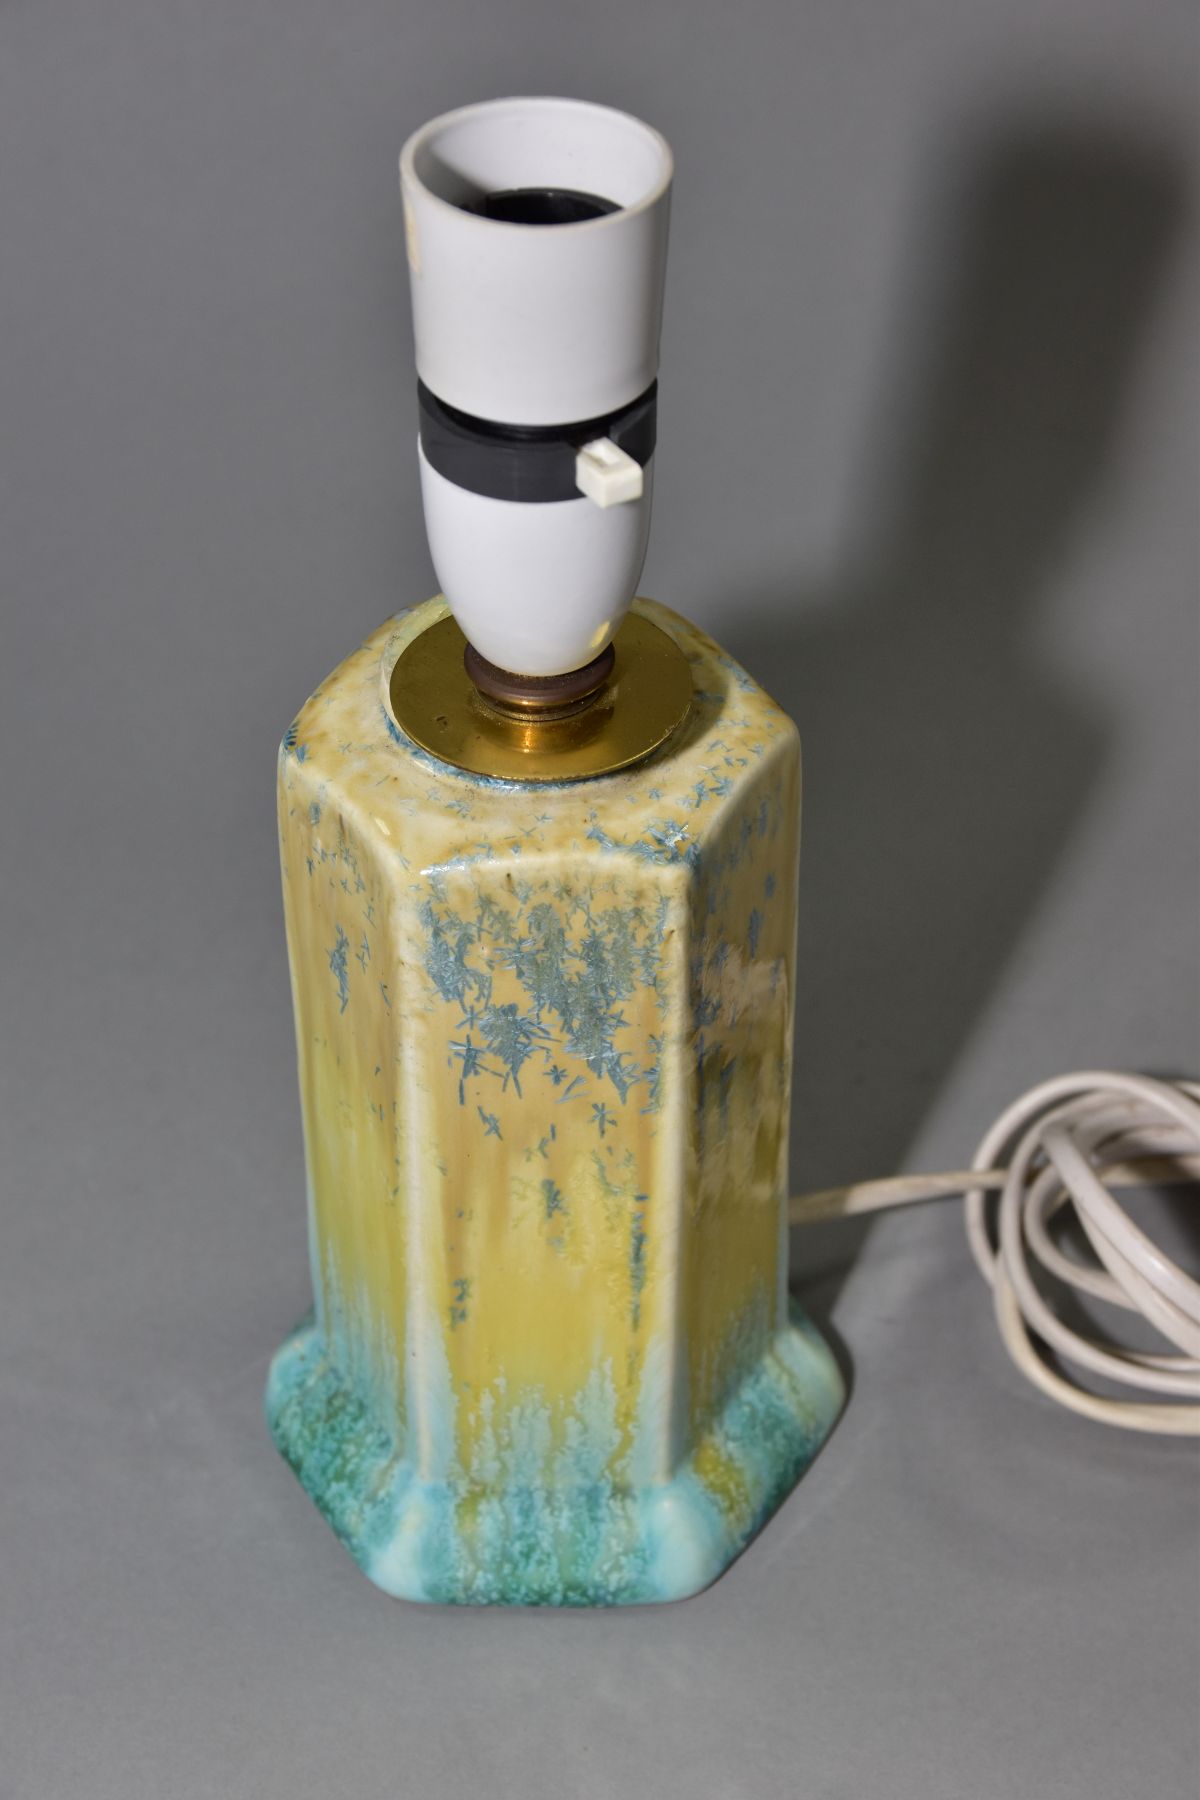 RUSKIN POTTERY, a hexagonal vase converted to a lamp base, yellow and green crystalline glazes, - Image 2 of 4